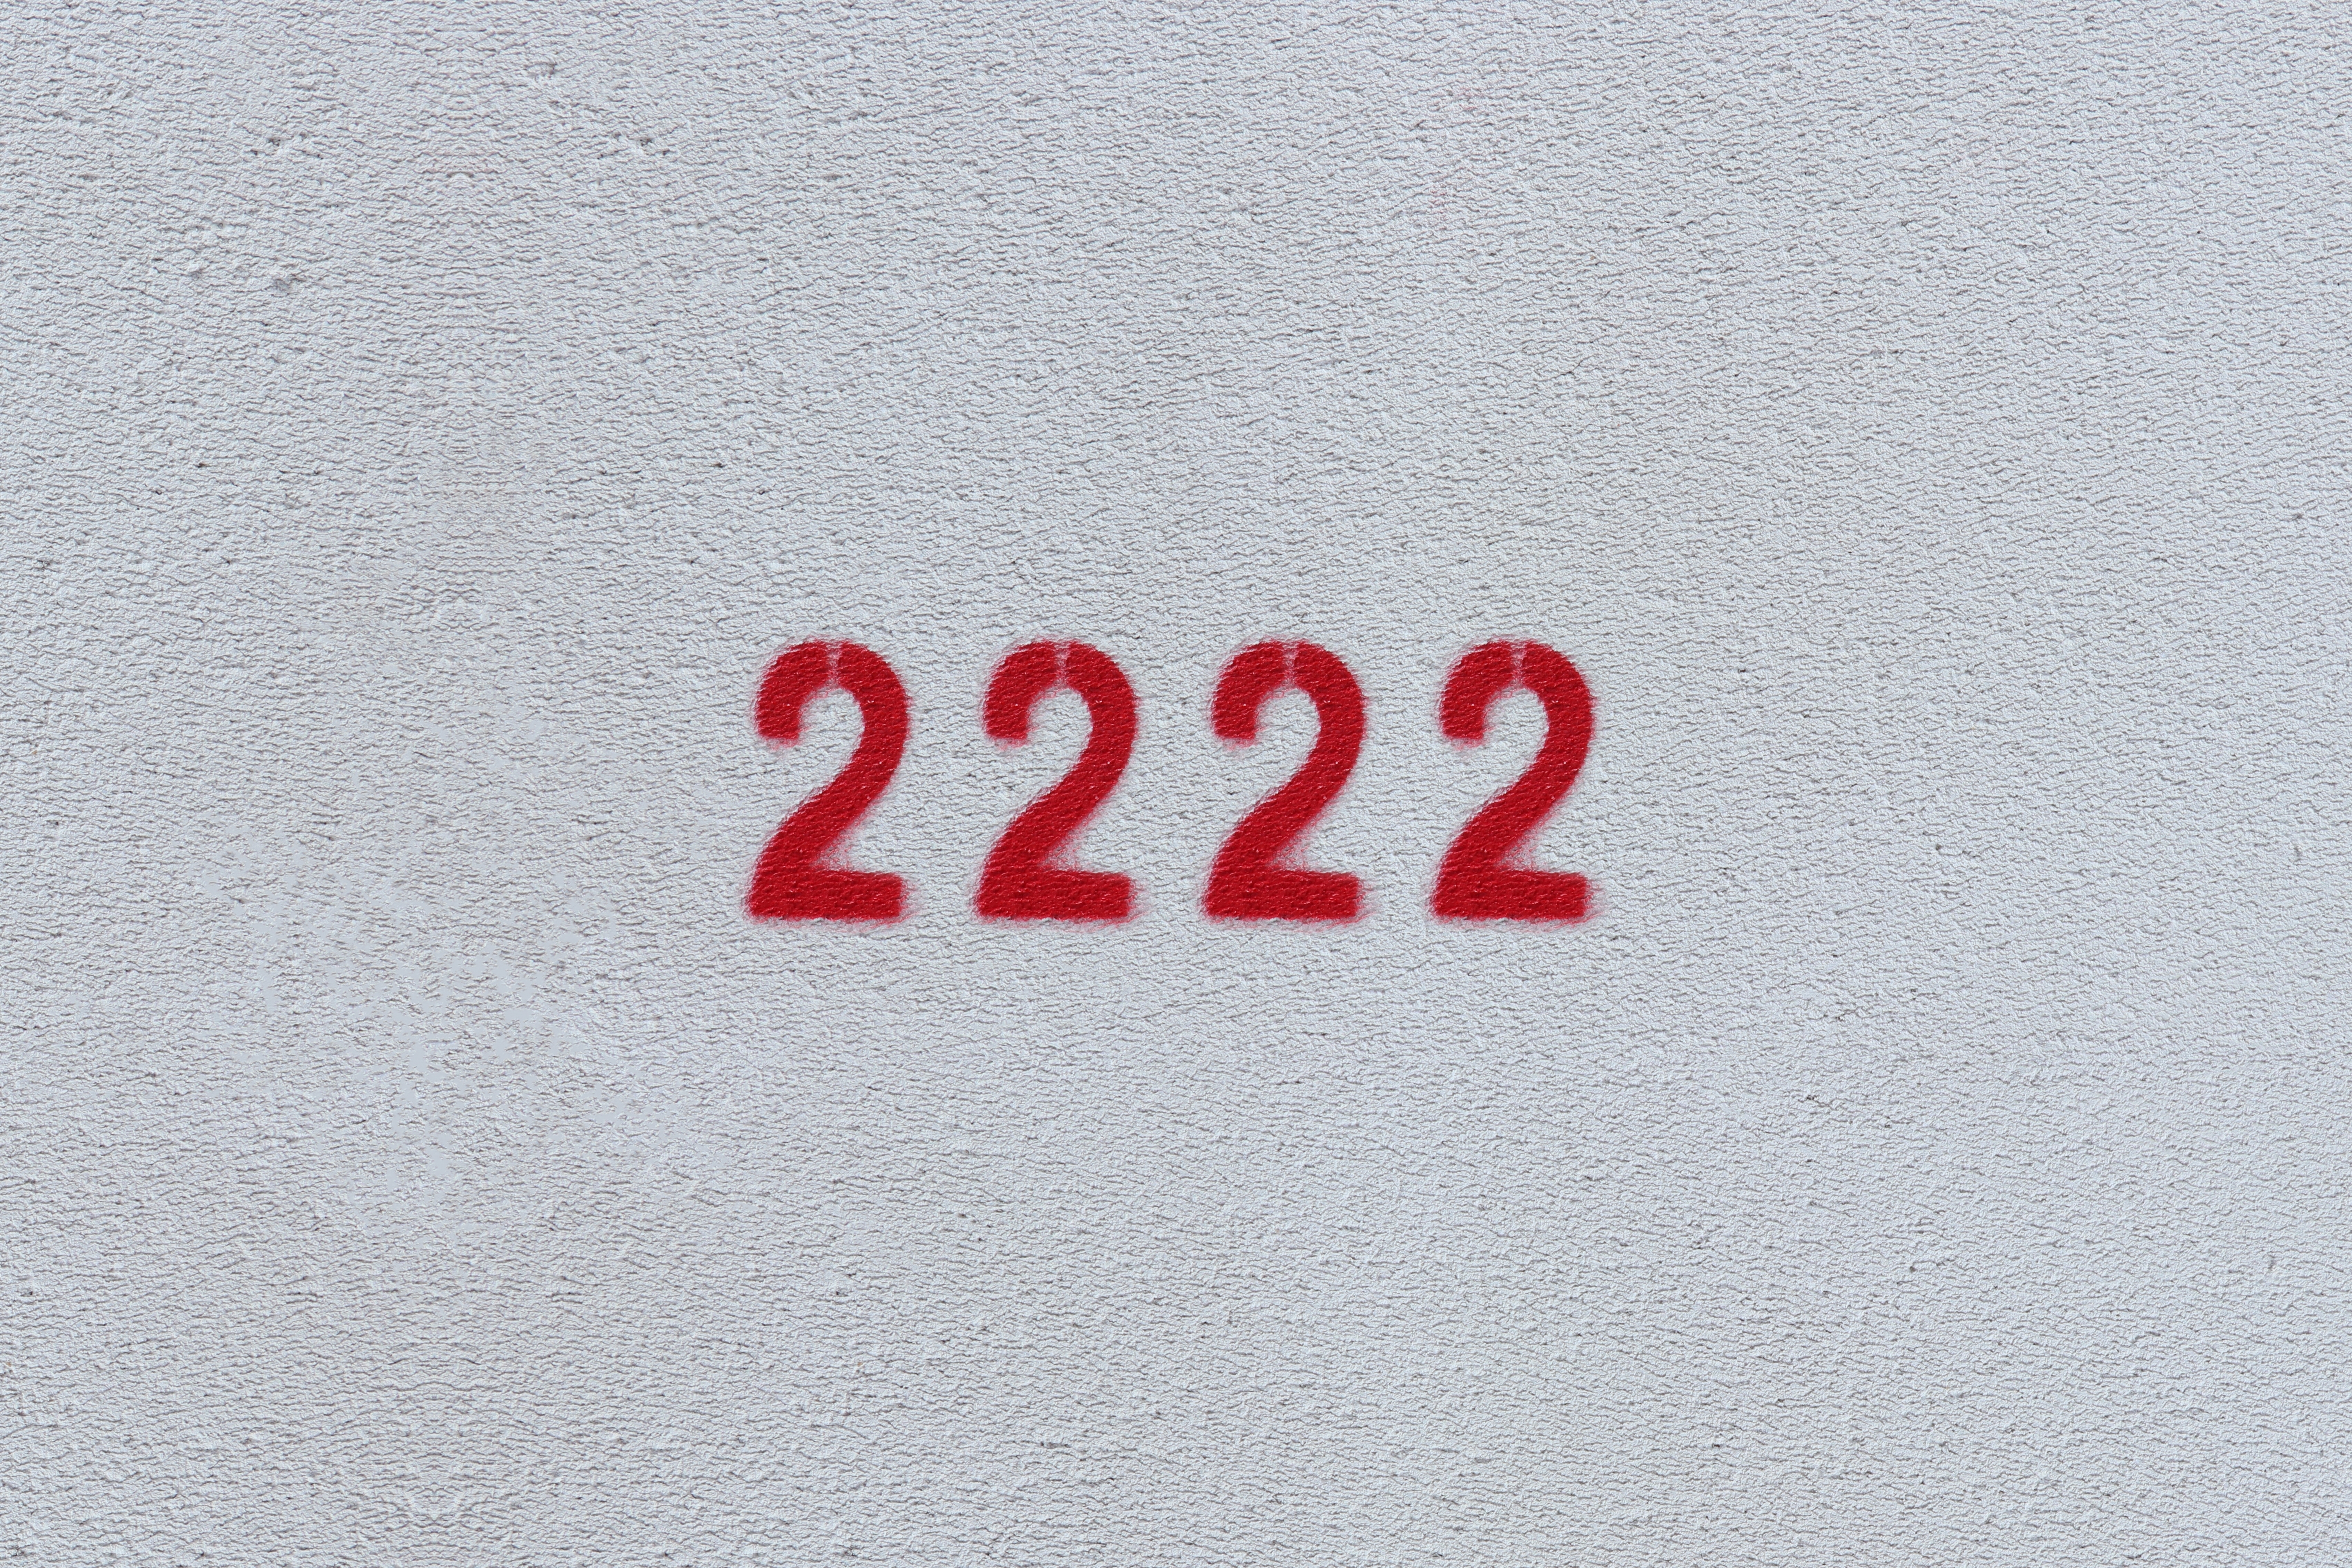 A white background with '2222' written in red